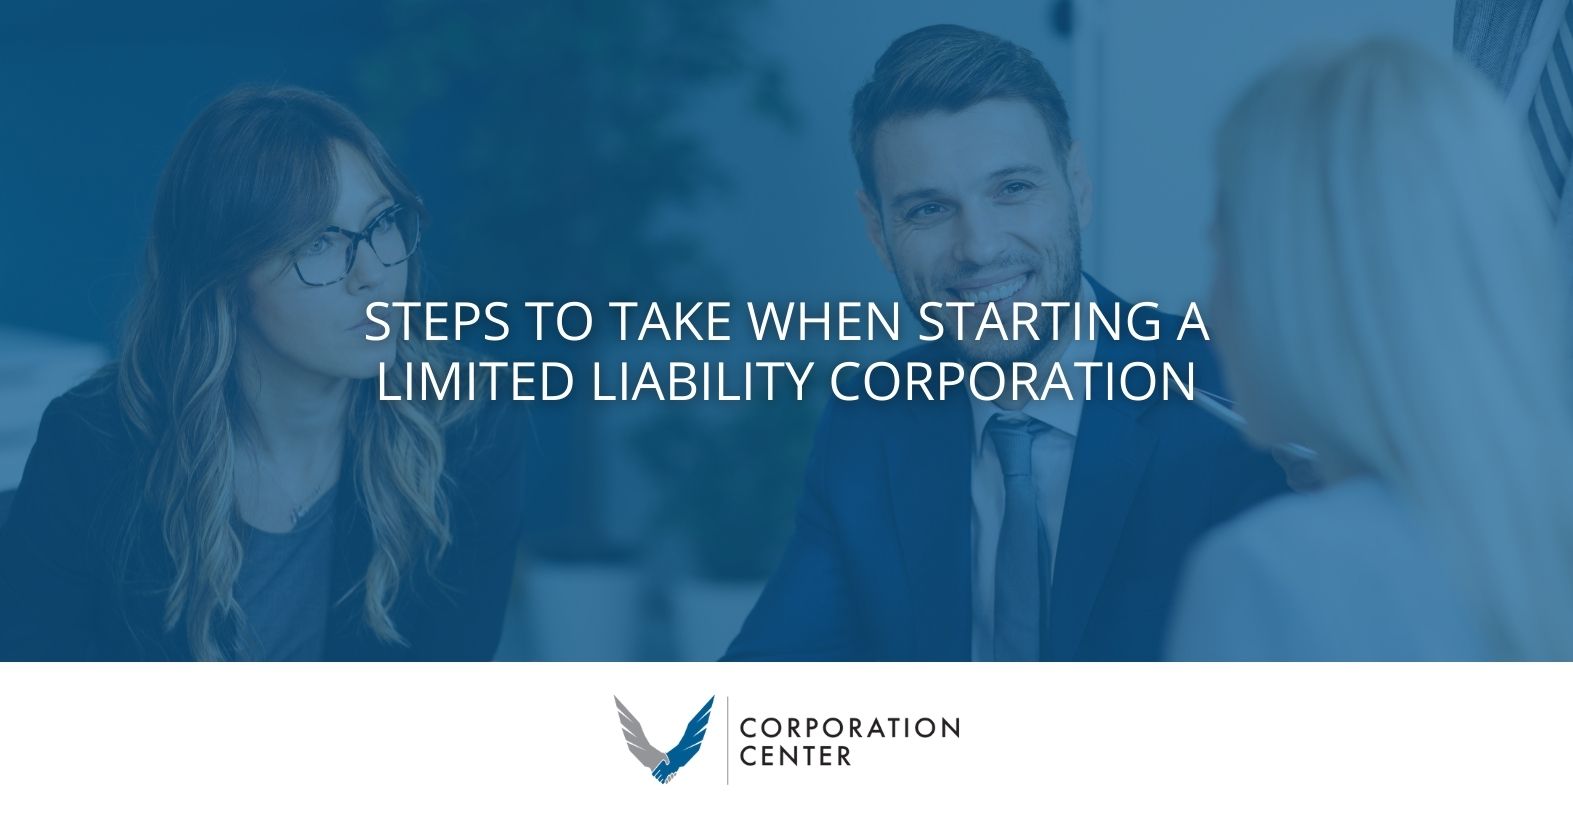 Starting a Limited Liability Corporation